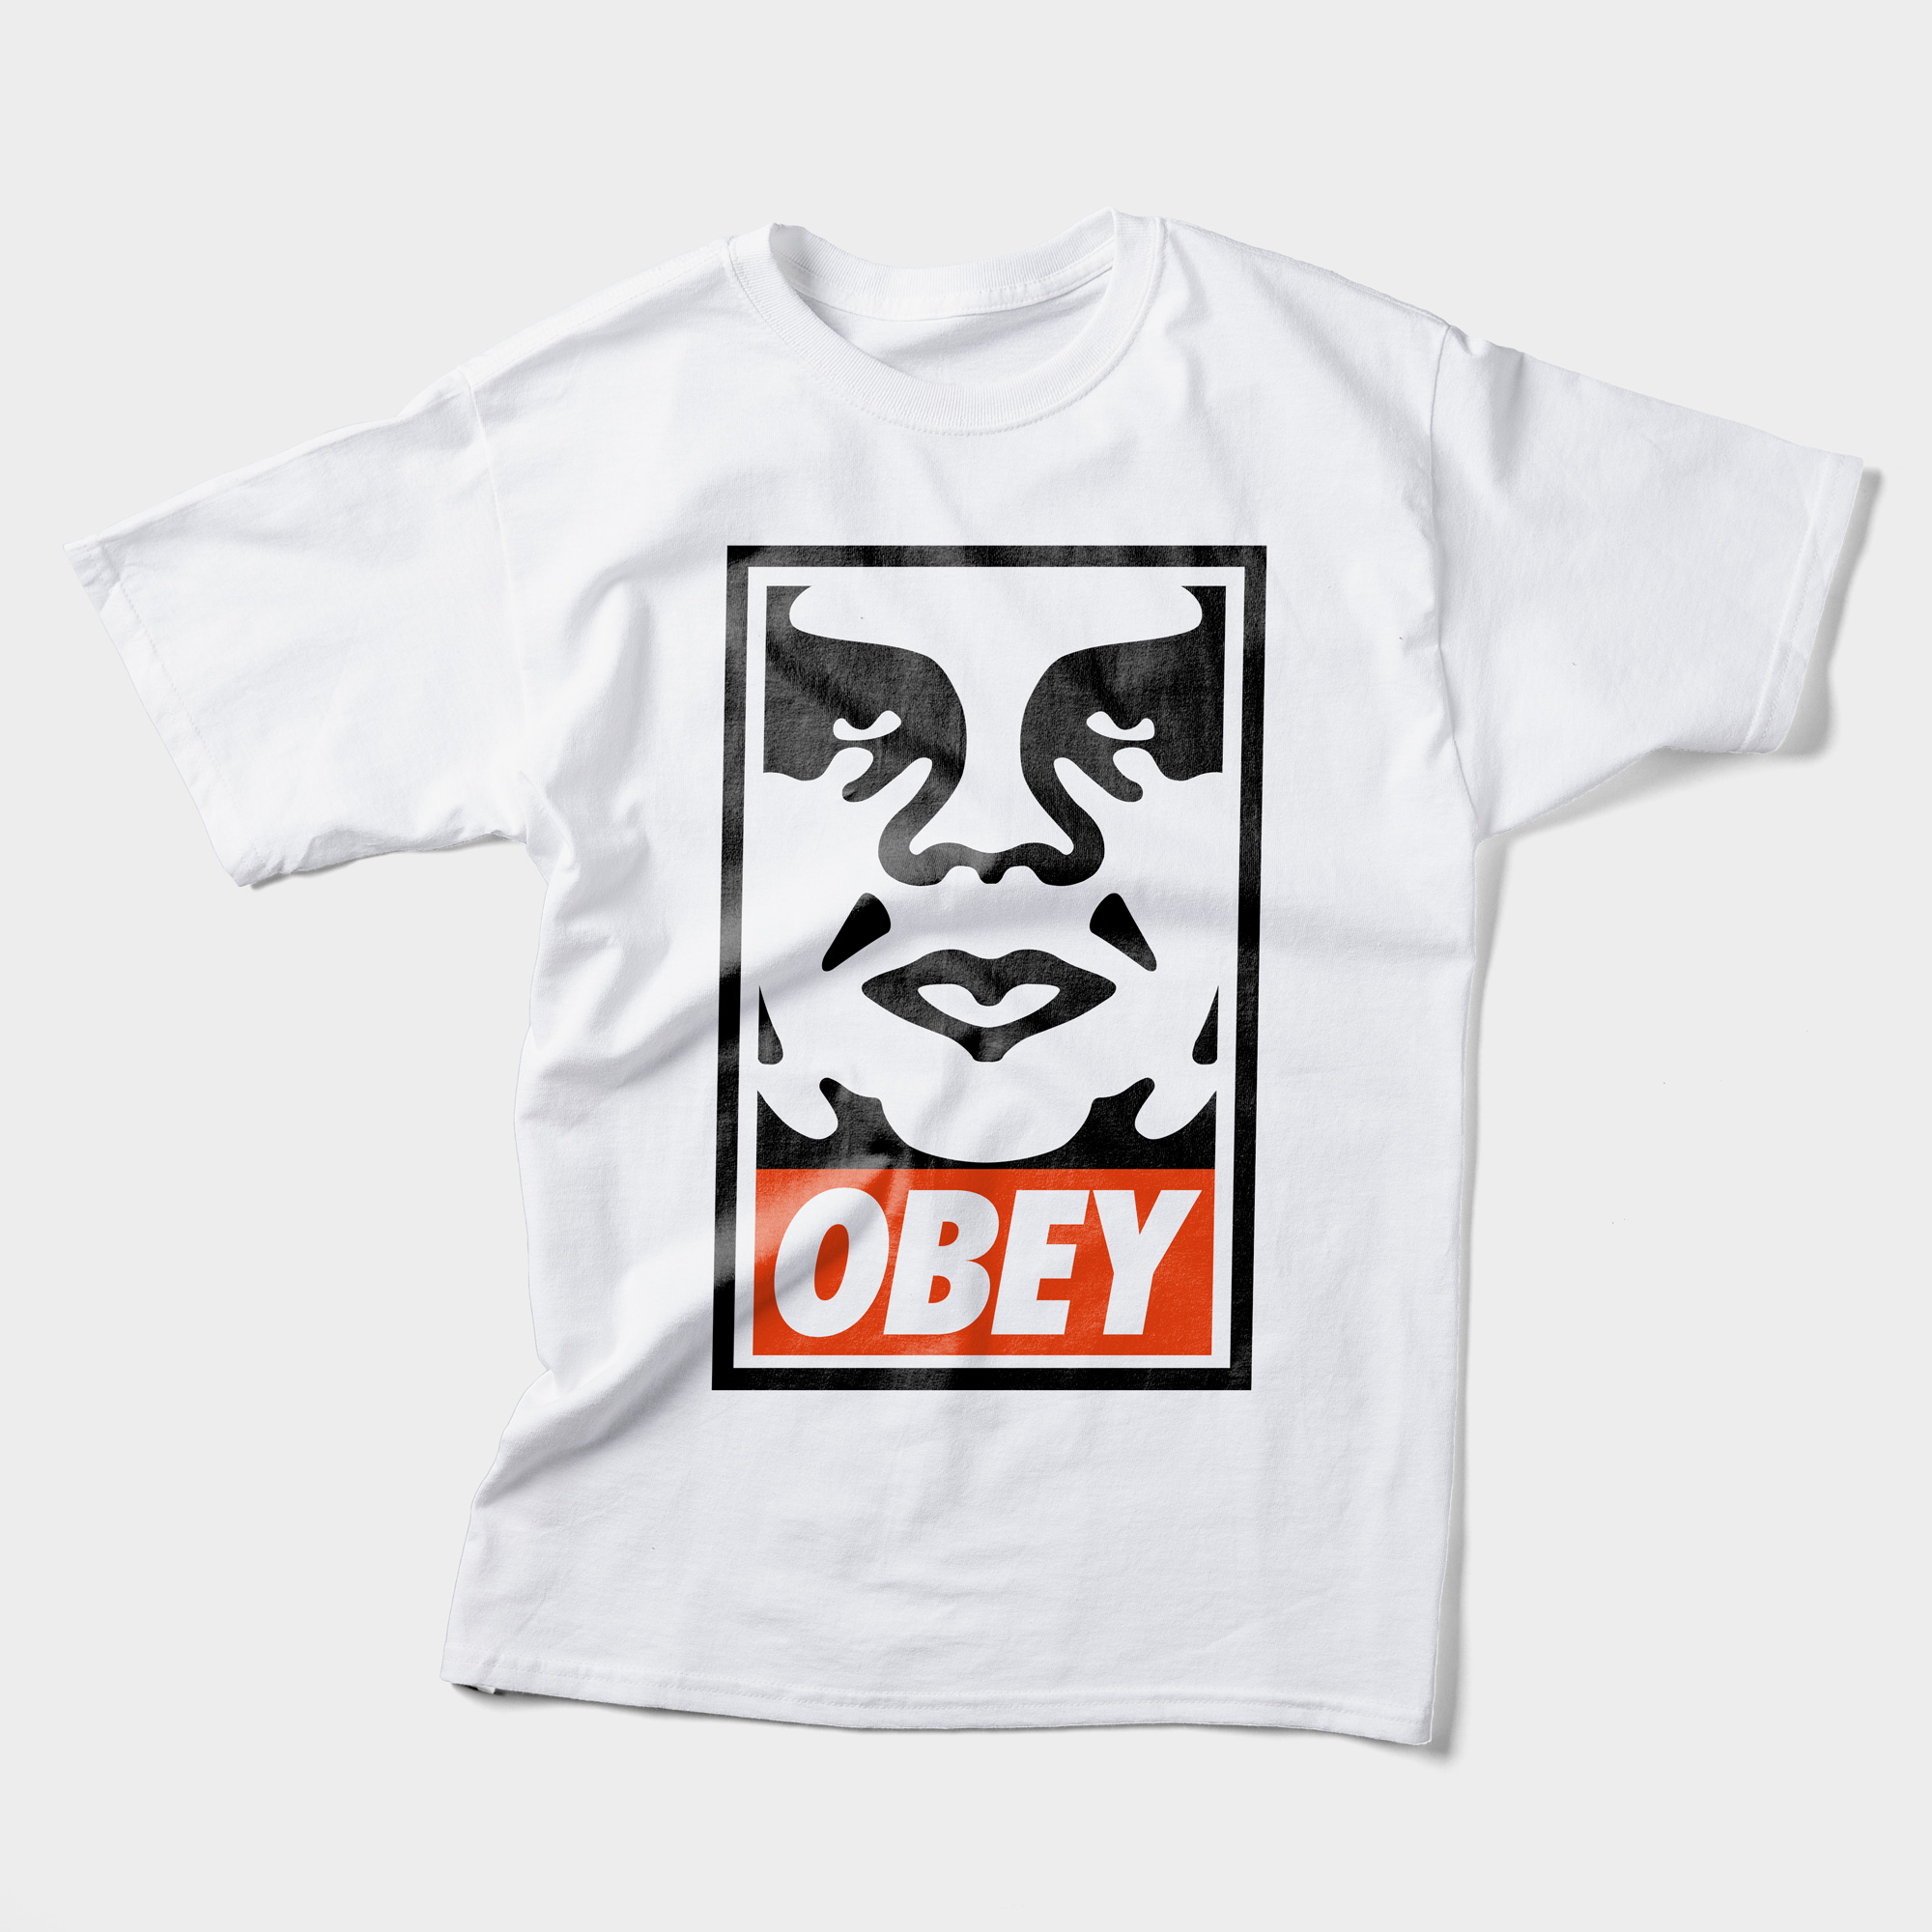 Shepard Fairey's OBEY design featuring Andre The Giant displayed the legendary wrestler's influence on pop culture. 